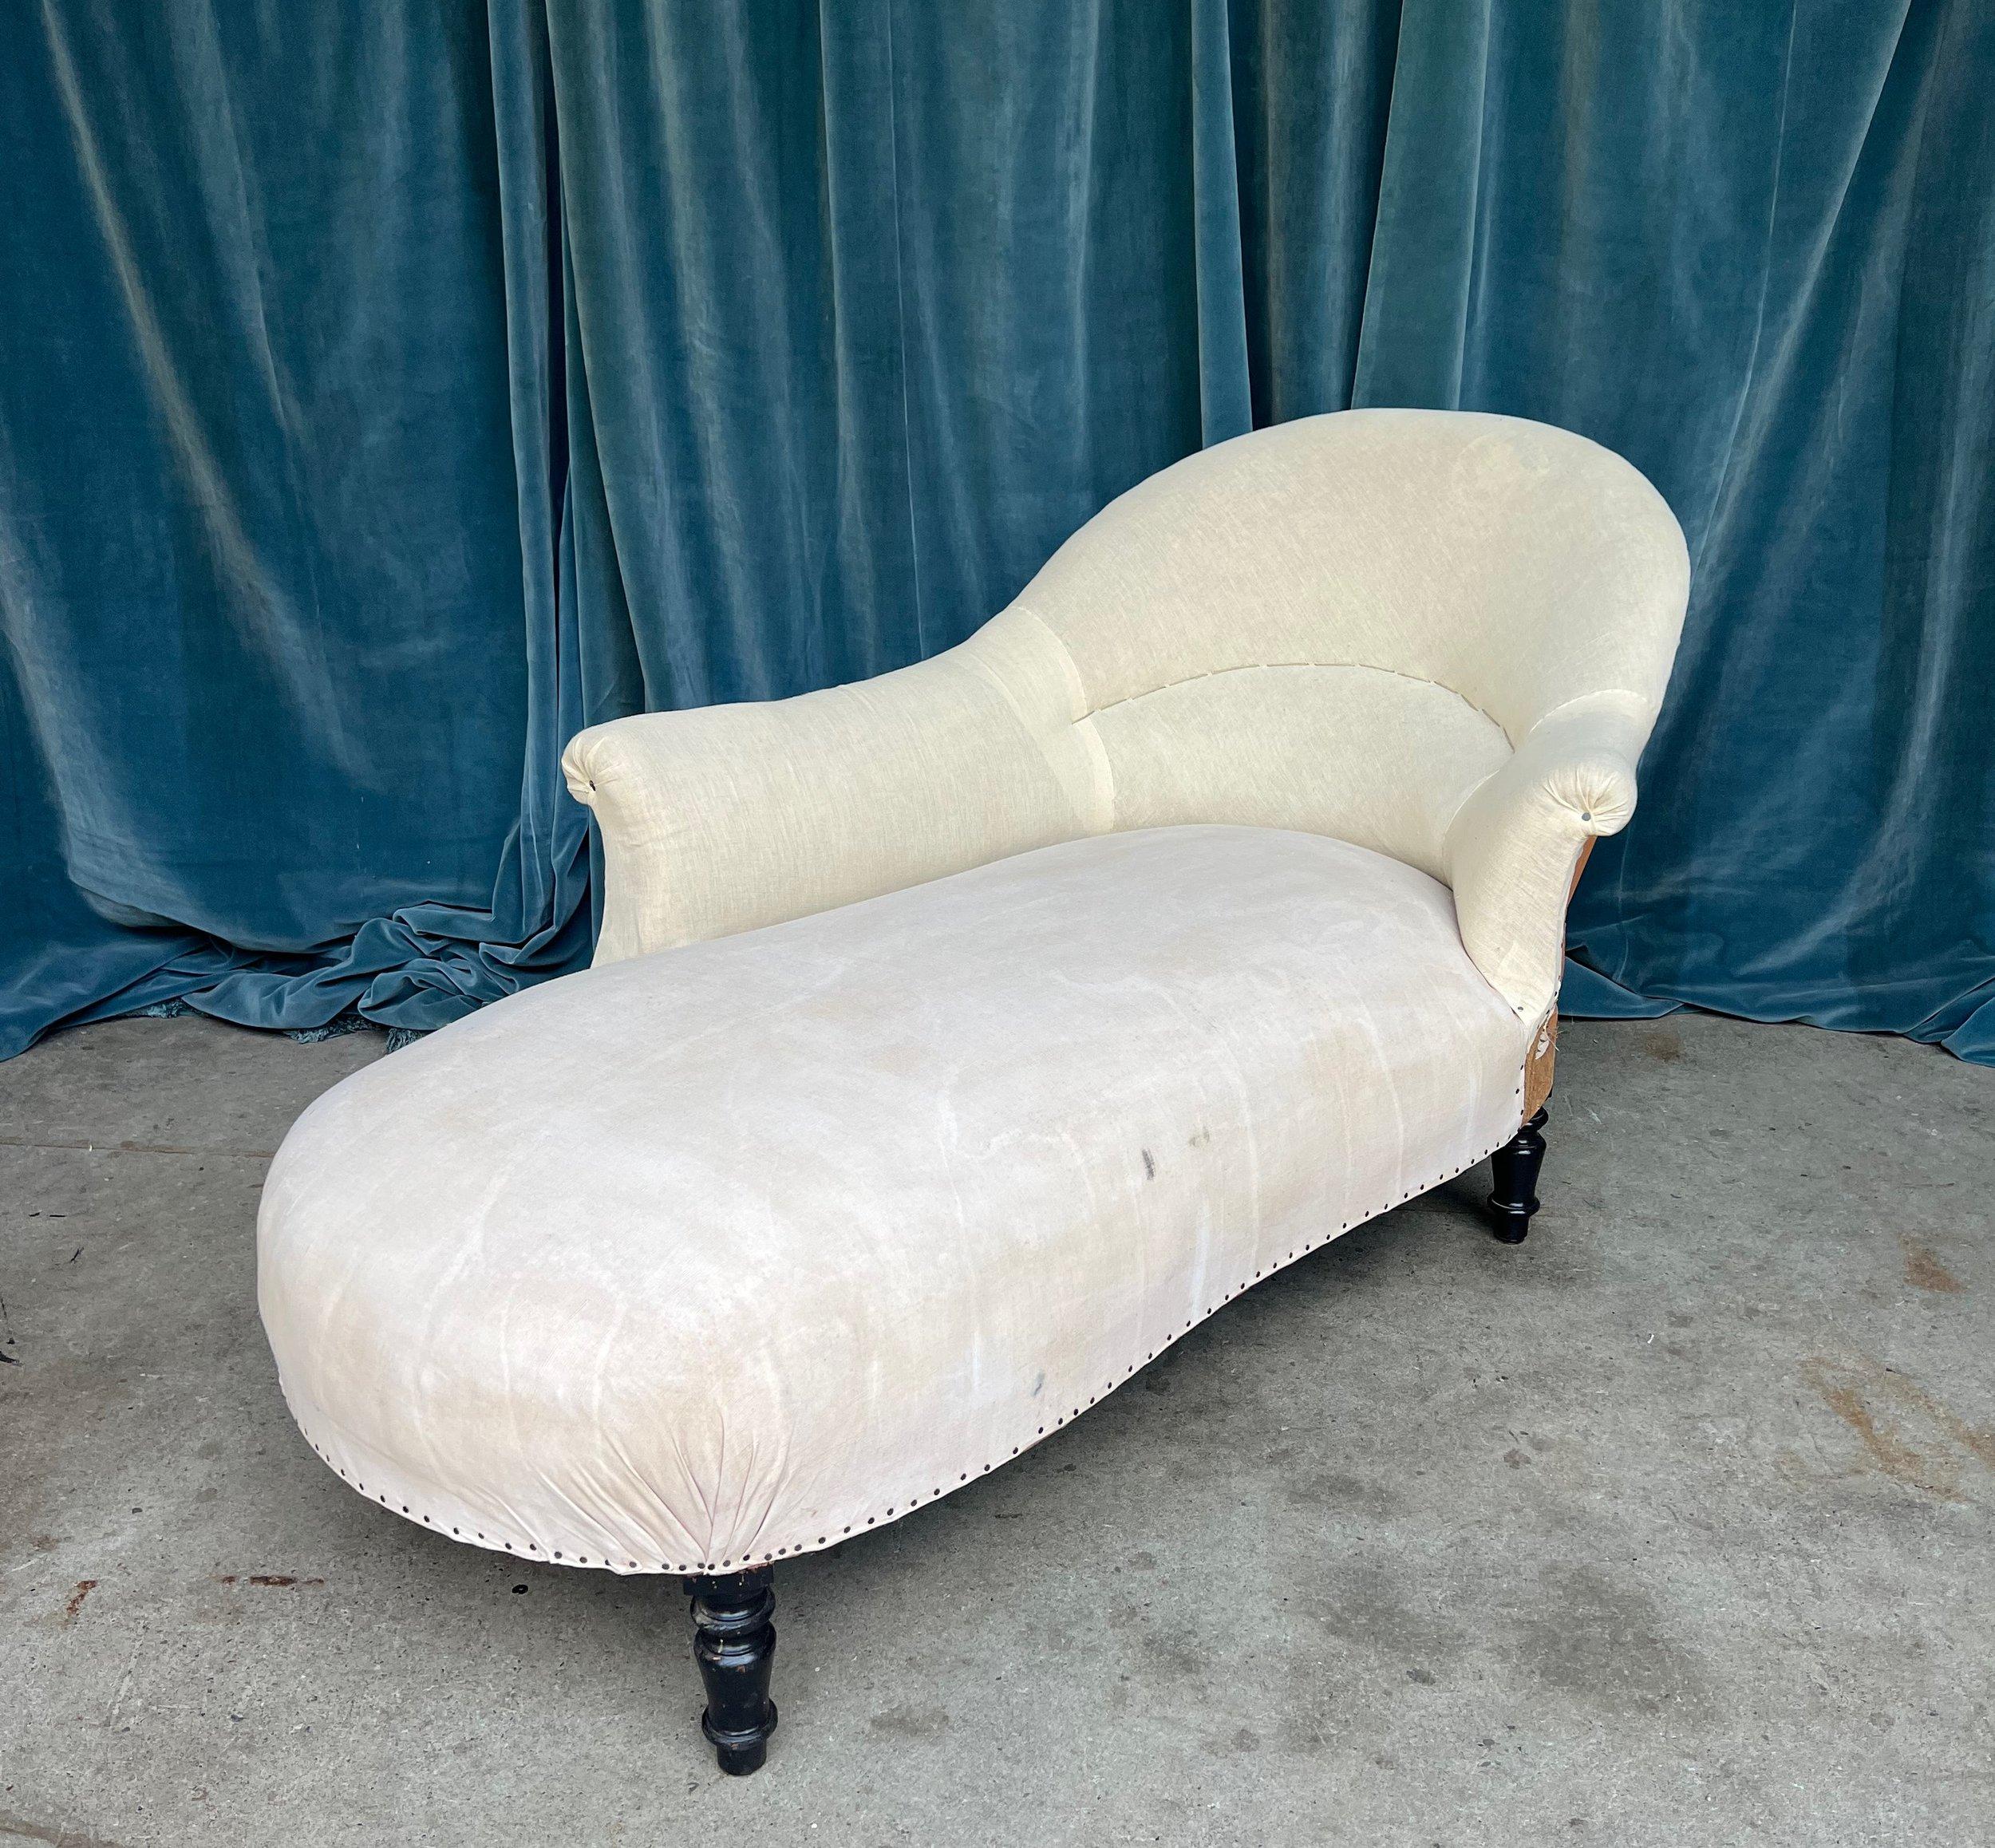 This classic French chaise lounge from the 19th century is a true masterpiece. The Napoleon III style provides a perfect blend of classical elegance and chic sophistication that will add an unparalleled level of refinement to any interior. The